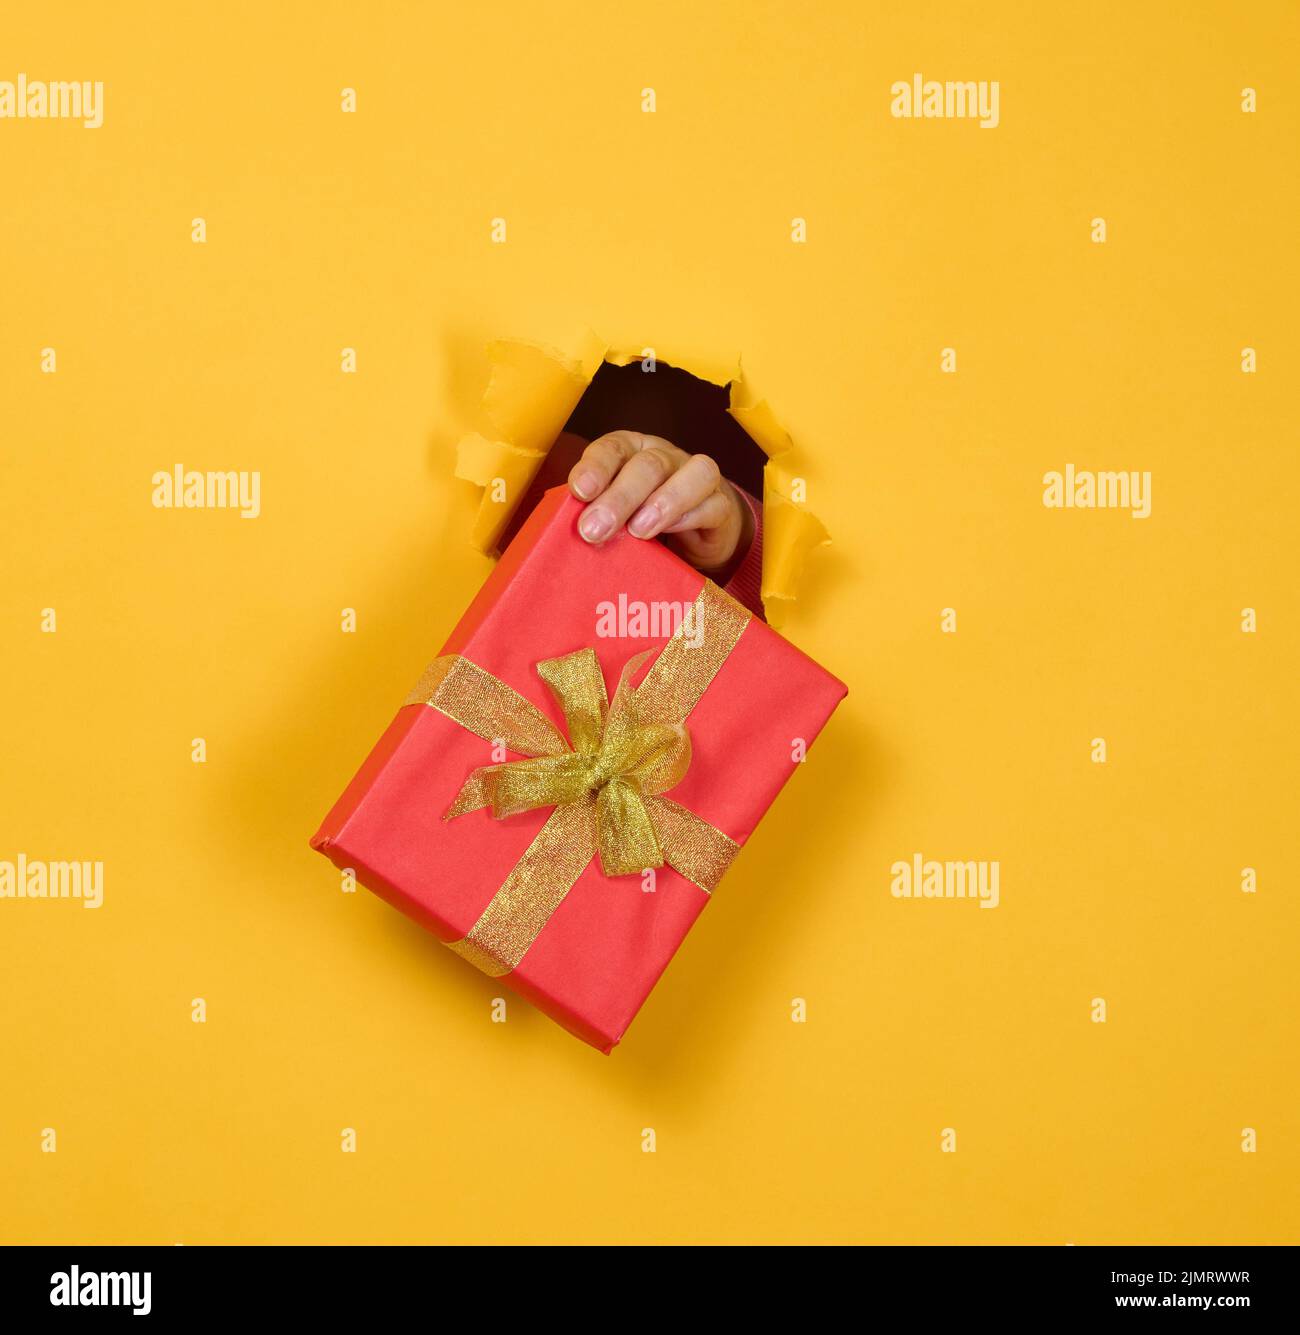 Female hand holds a box with a gift on a yellow background, part of the body sticks out of a torn hole in a paper background. Co Stock Photo